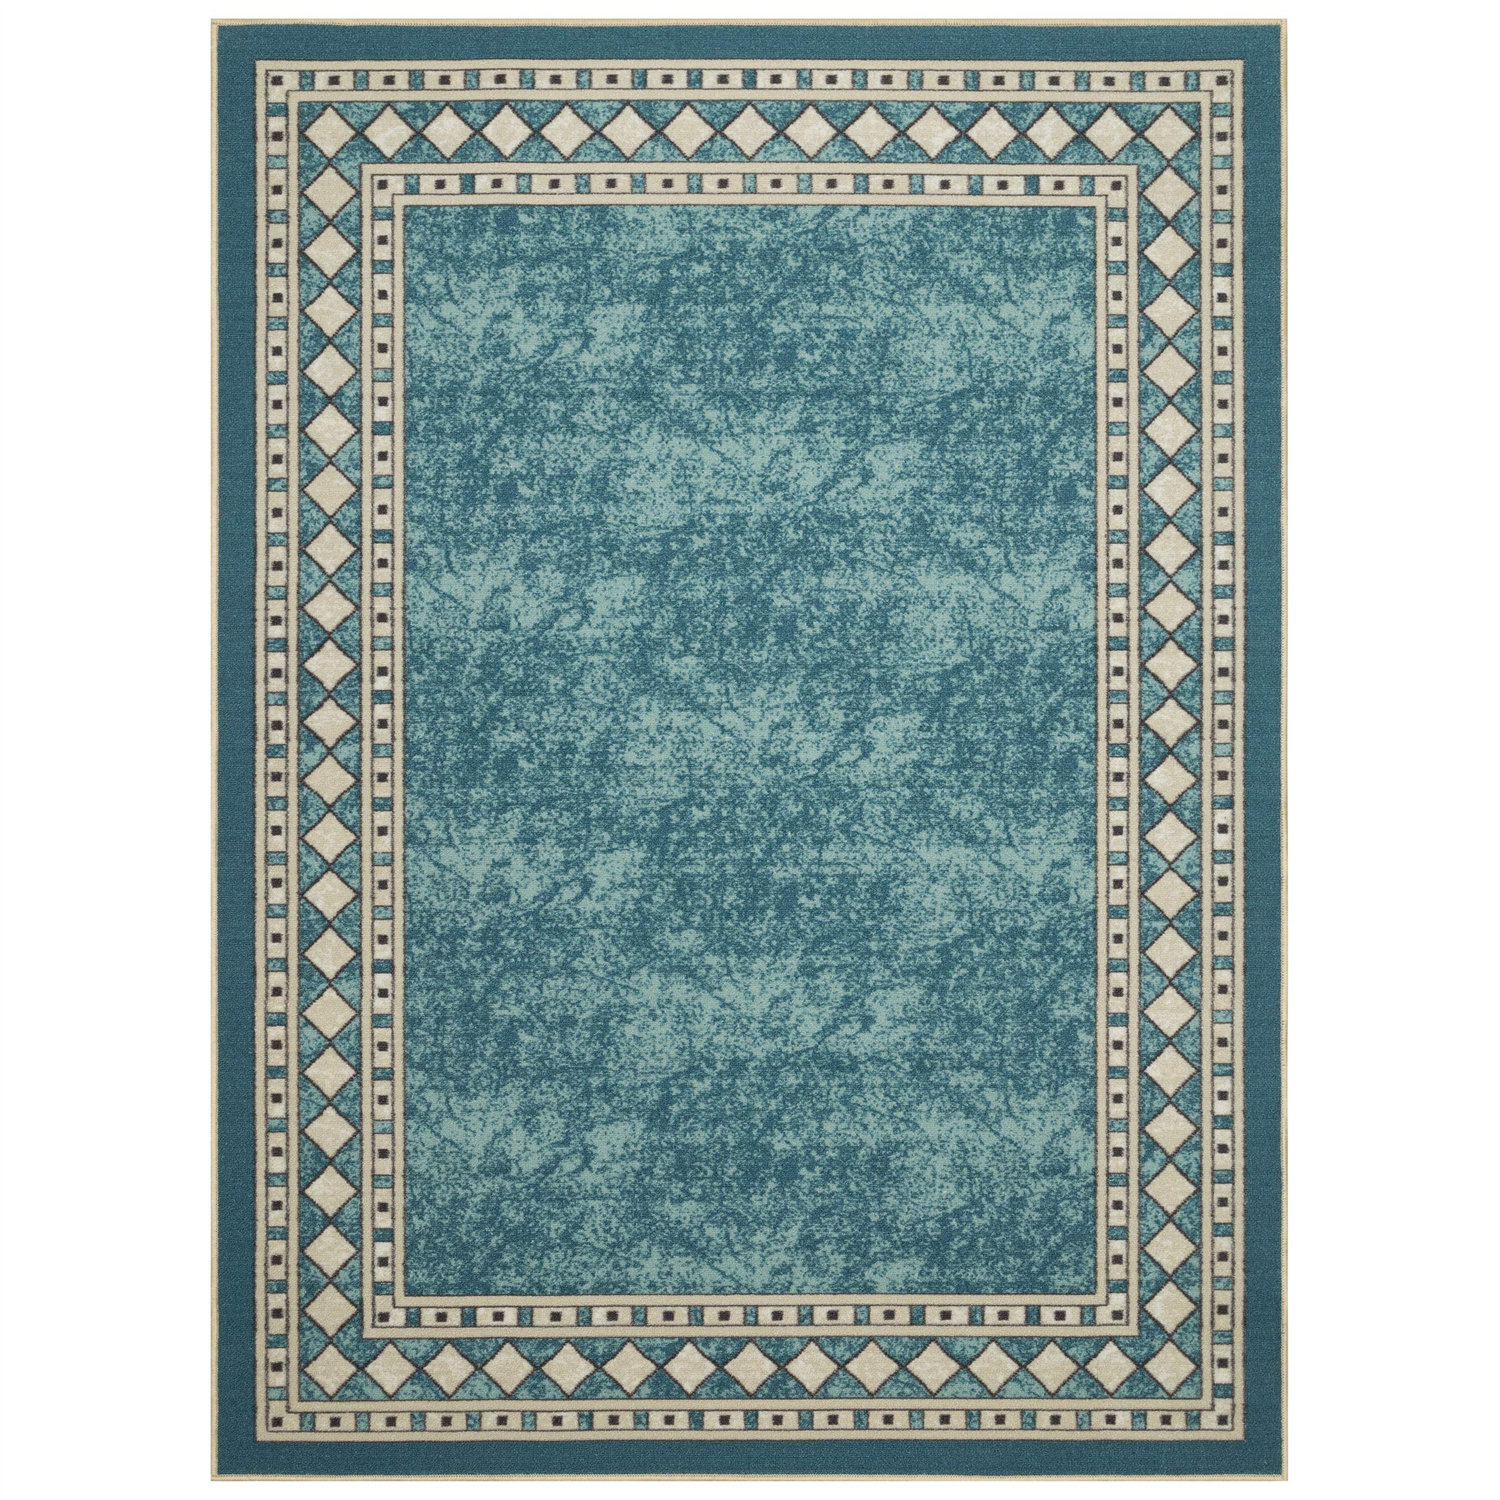 Antep Rugs Alfombras Modern Bordered 2x4 Non-Skid (Non-Slip) Low Profile  Pile Rubber Backing Kitchen Area Rugs (Navy Blue, 2'3 x 4')